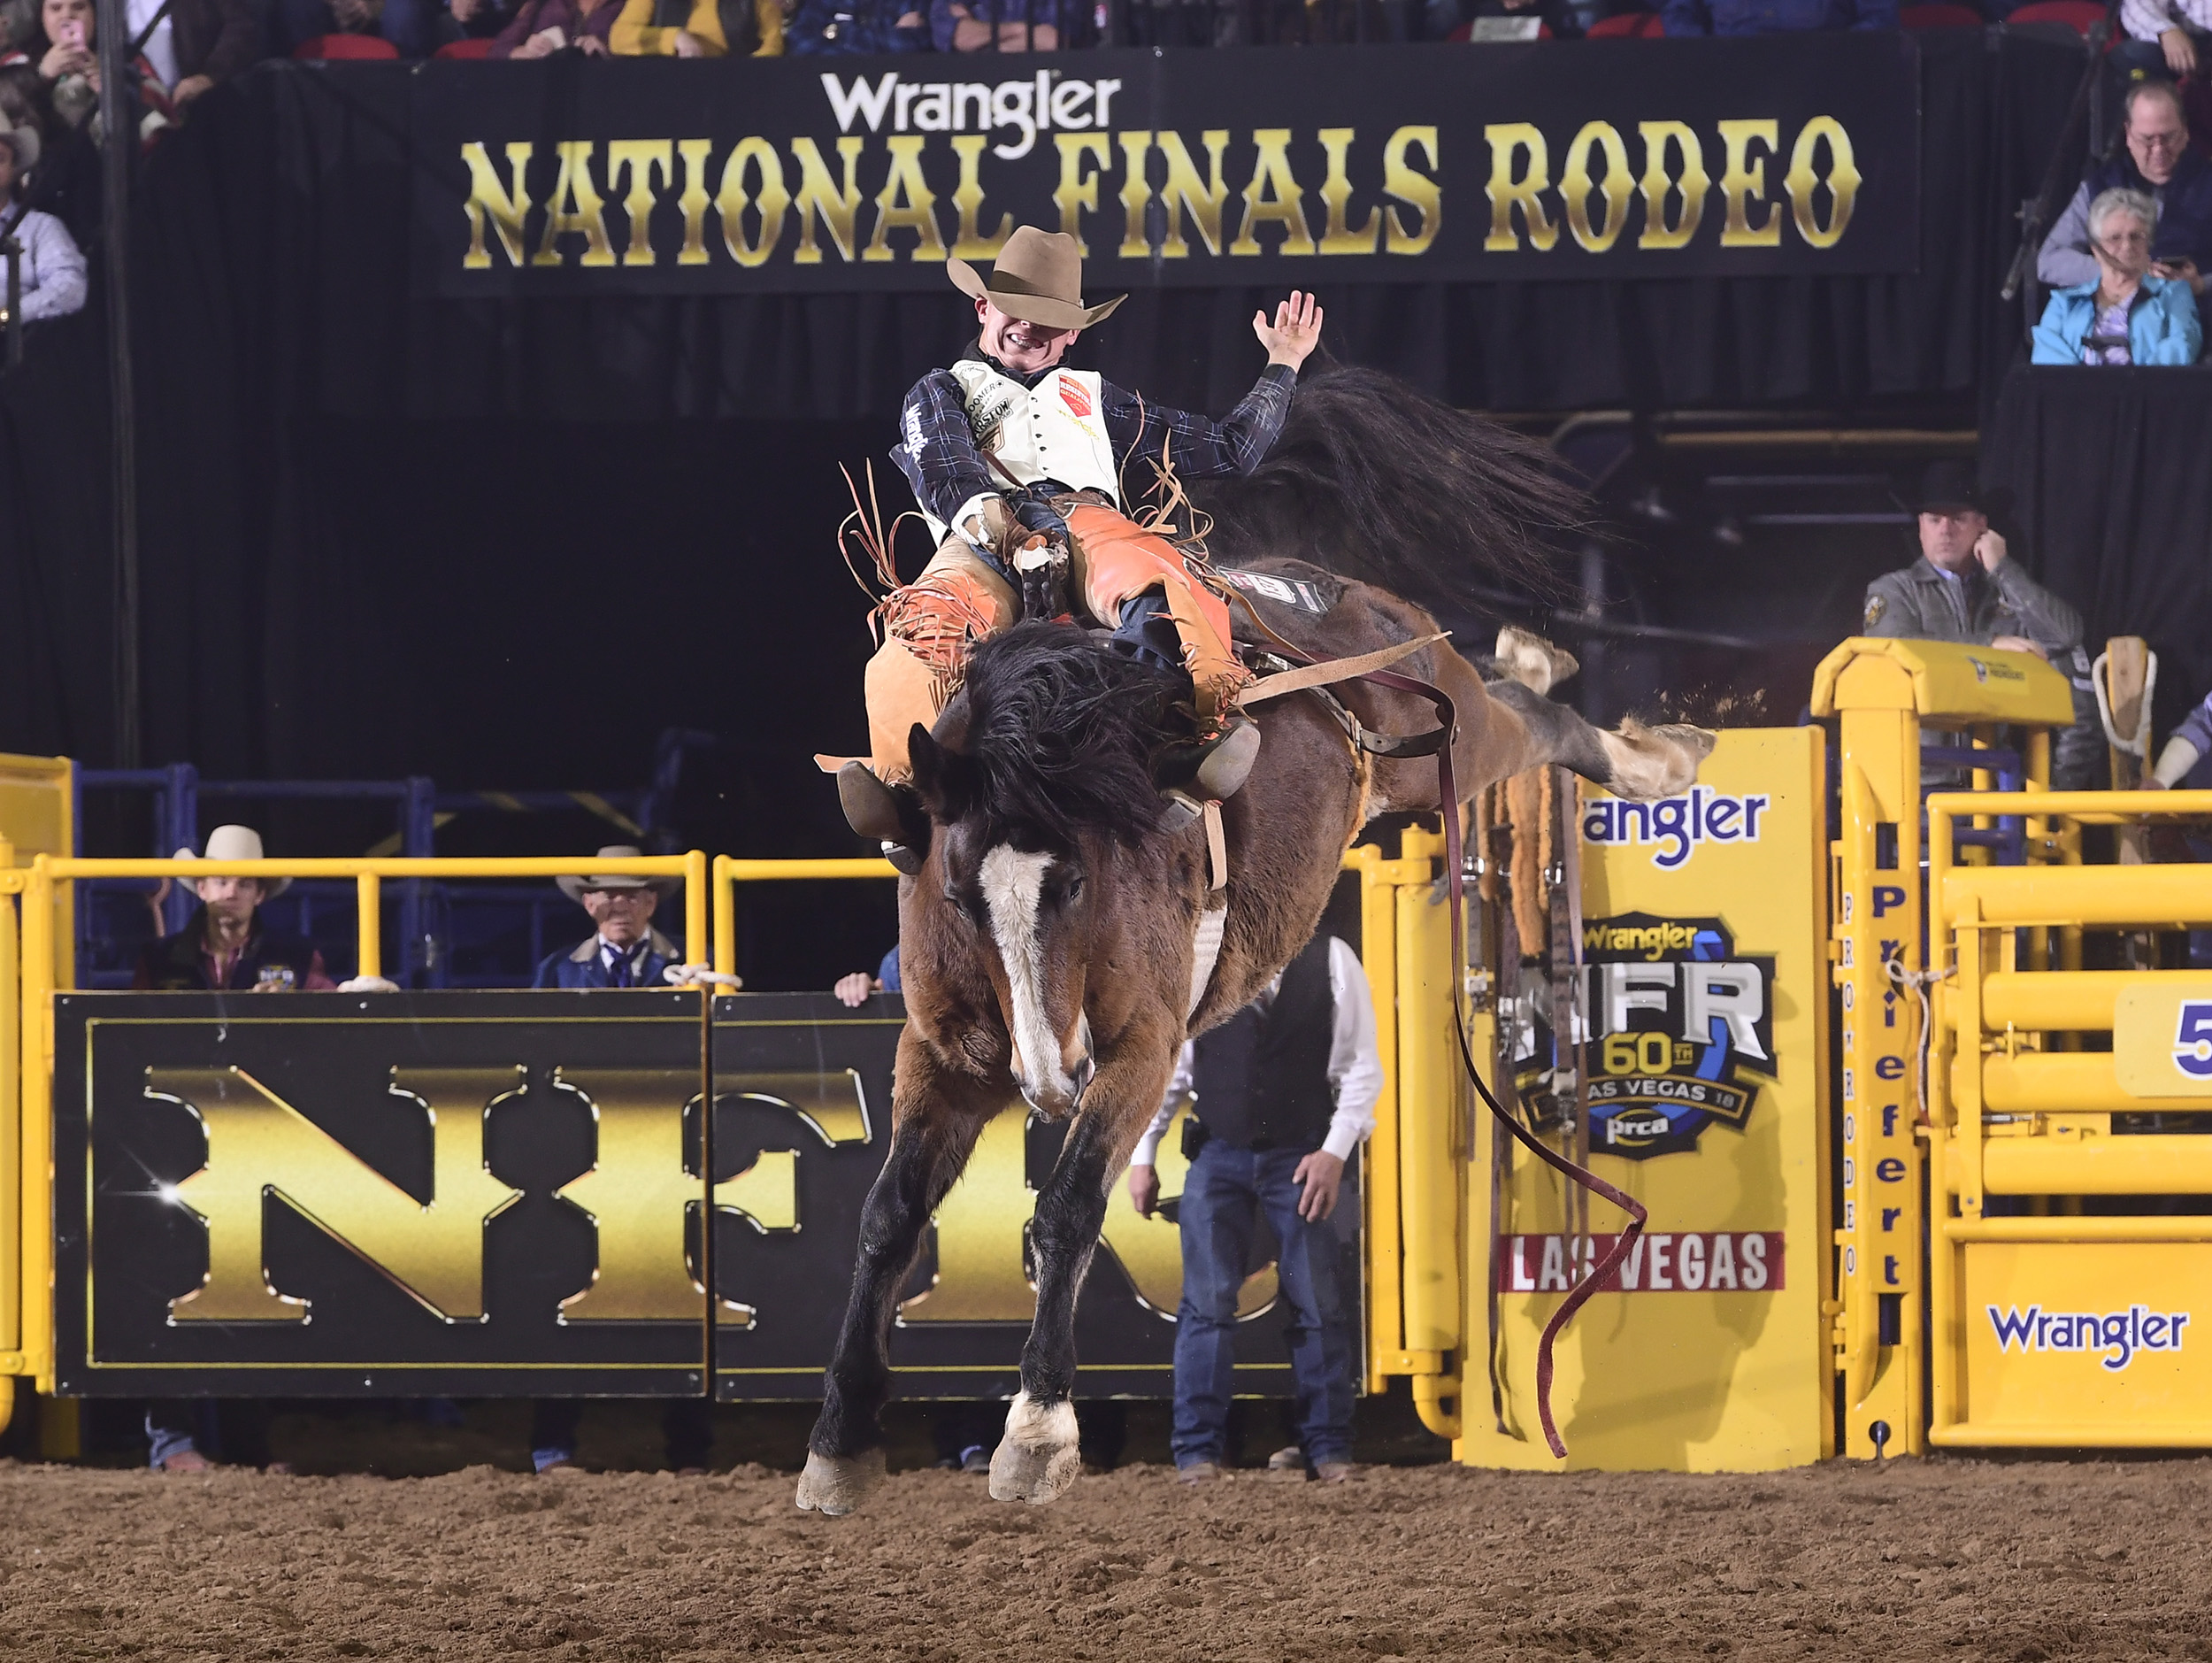 Clayton Biglow rides Frontier Rodeo's Big Night for 86.5 points to finish in a tie for fourth place in Wednesday's seventh go-round of the National Finals Rodeo. (PRCA PRORODEO PHOTO BY JAMES PHIFER)